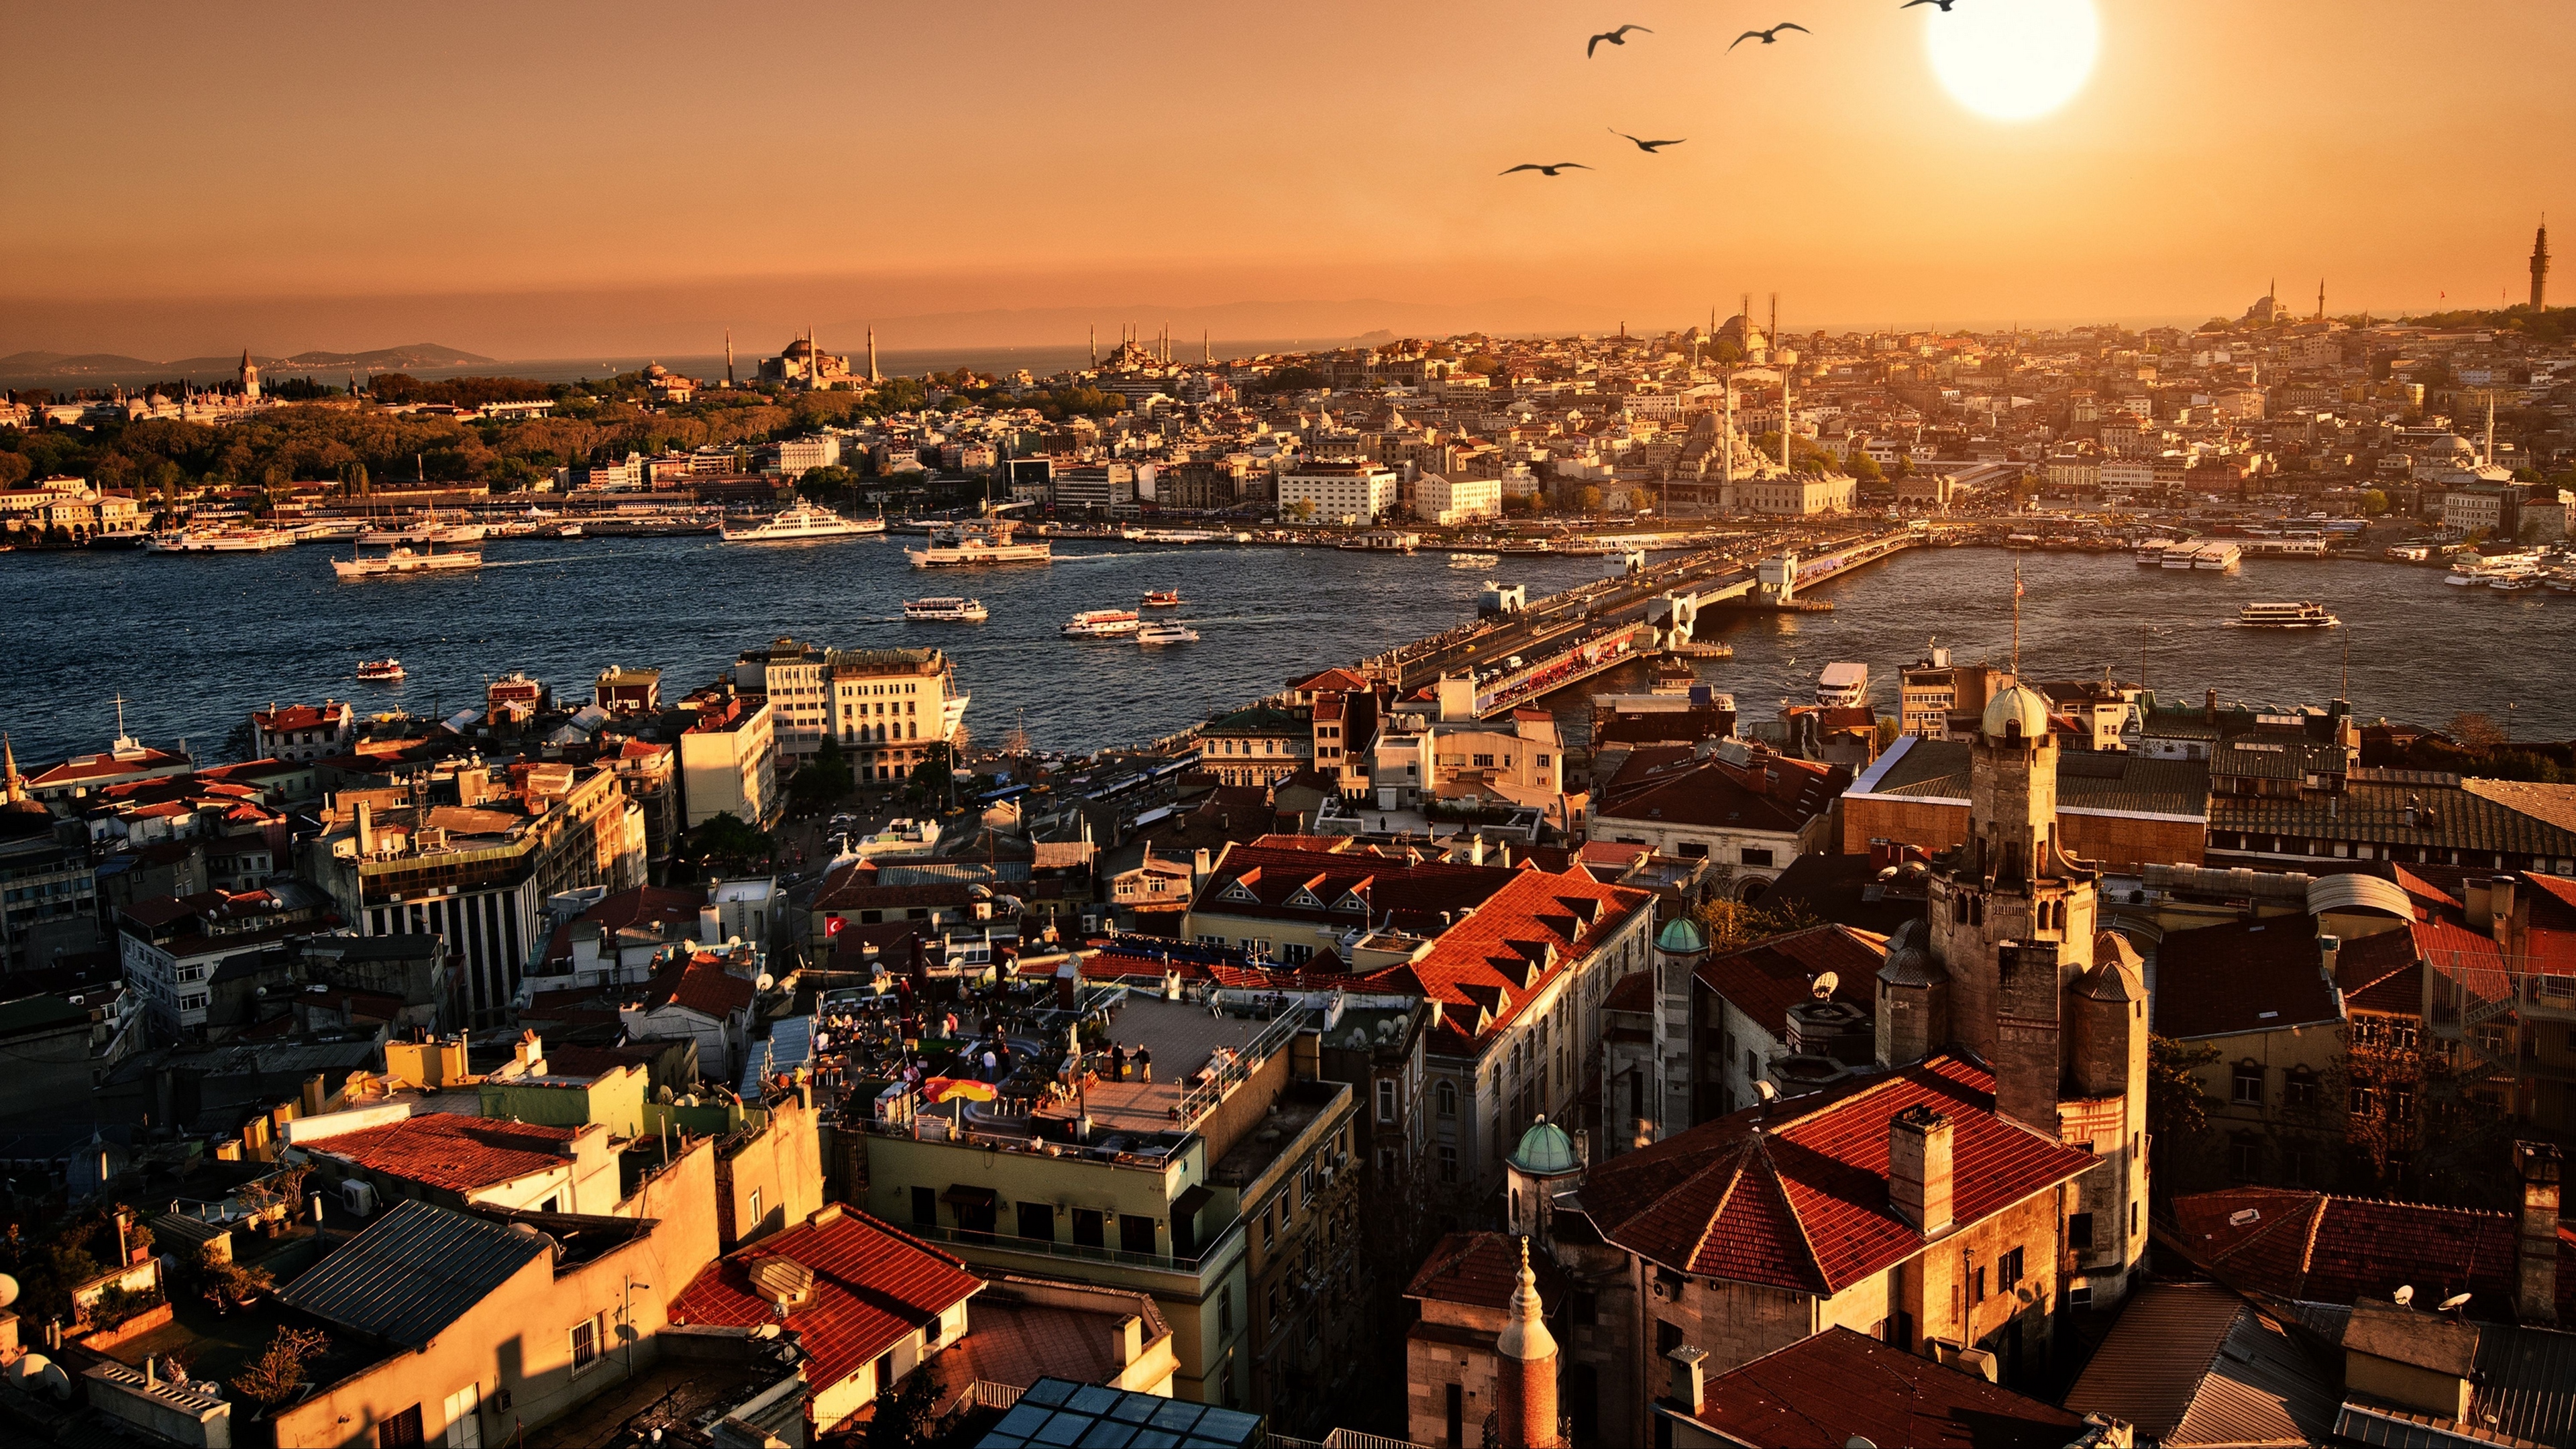 100 Stunning Istanbul Pictures Scenic Travel Photos  Download Free  Images on Unsplash